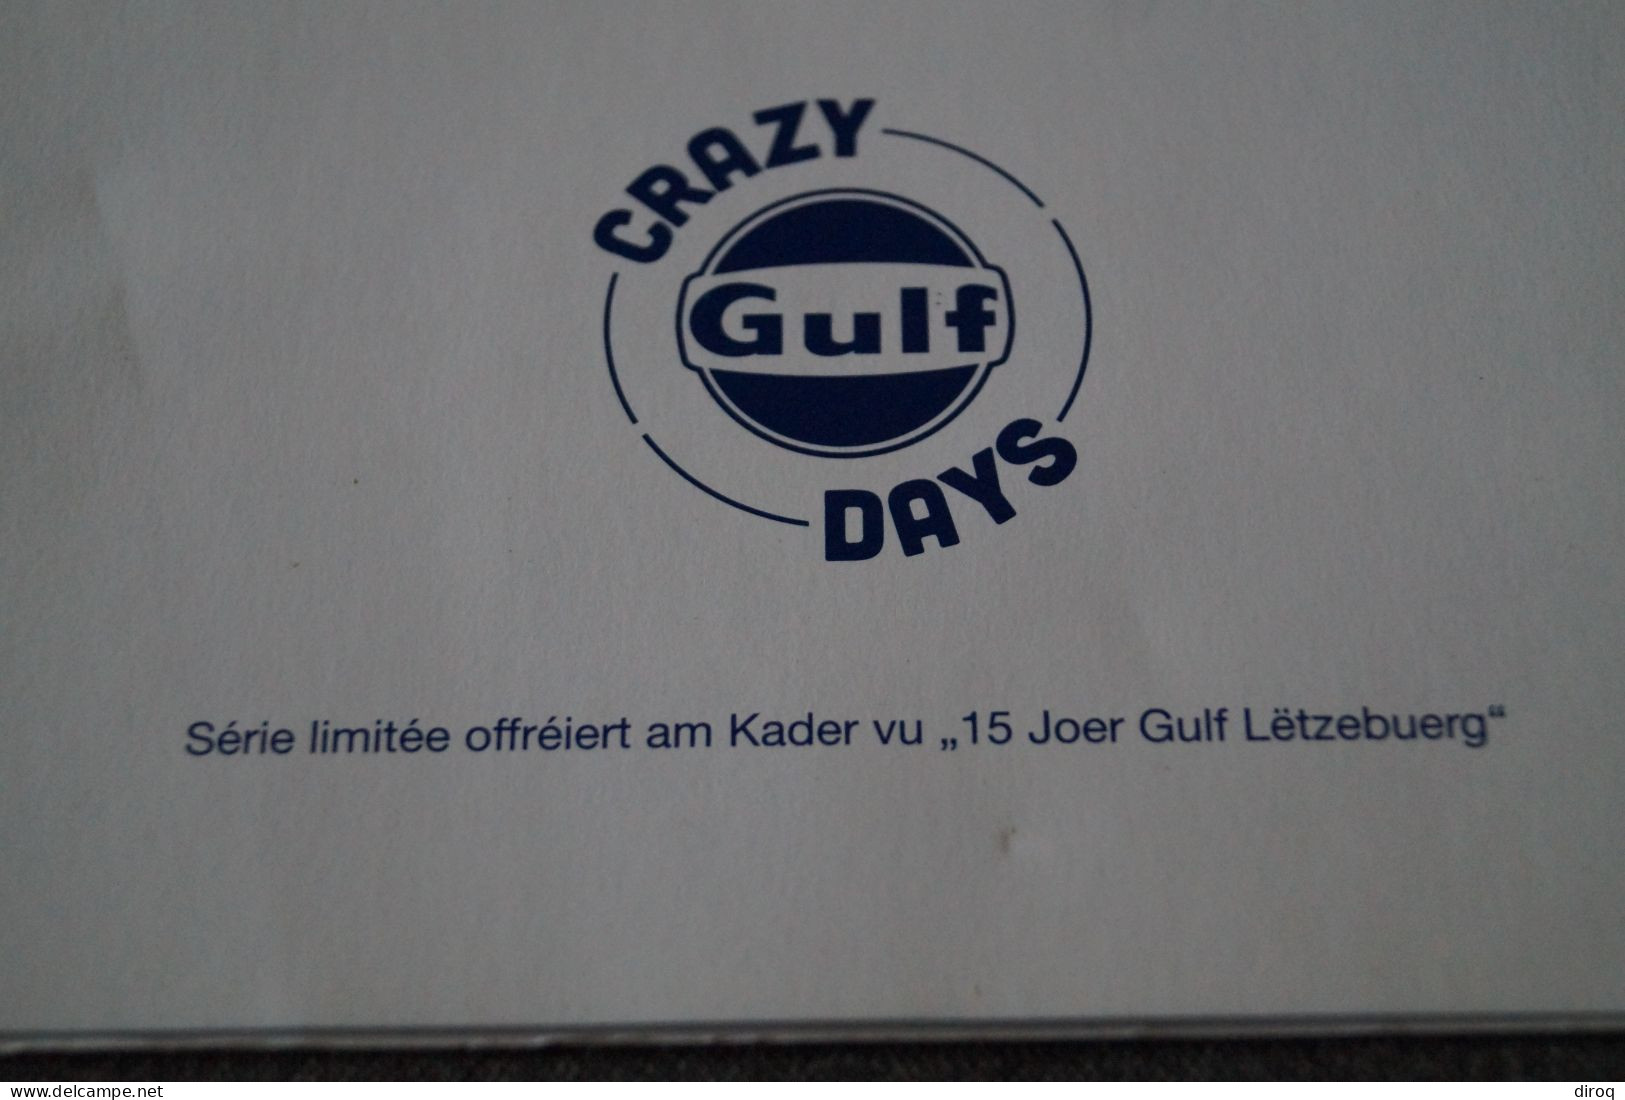 Tirage Limité,un Timbre Luxembourg,Crazy Gulf Days,strictement Neuf Avec Gomme, Pour Collection - Errors & Oddities